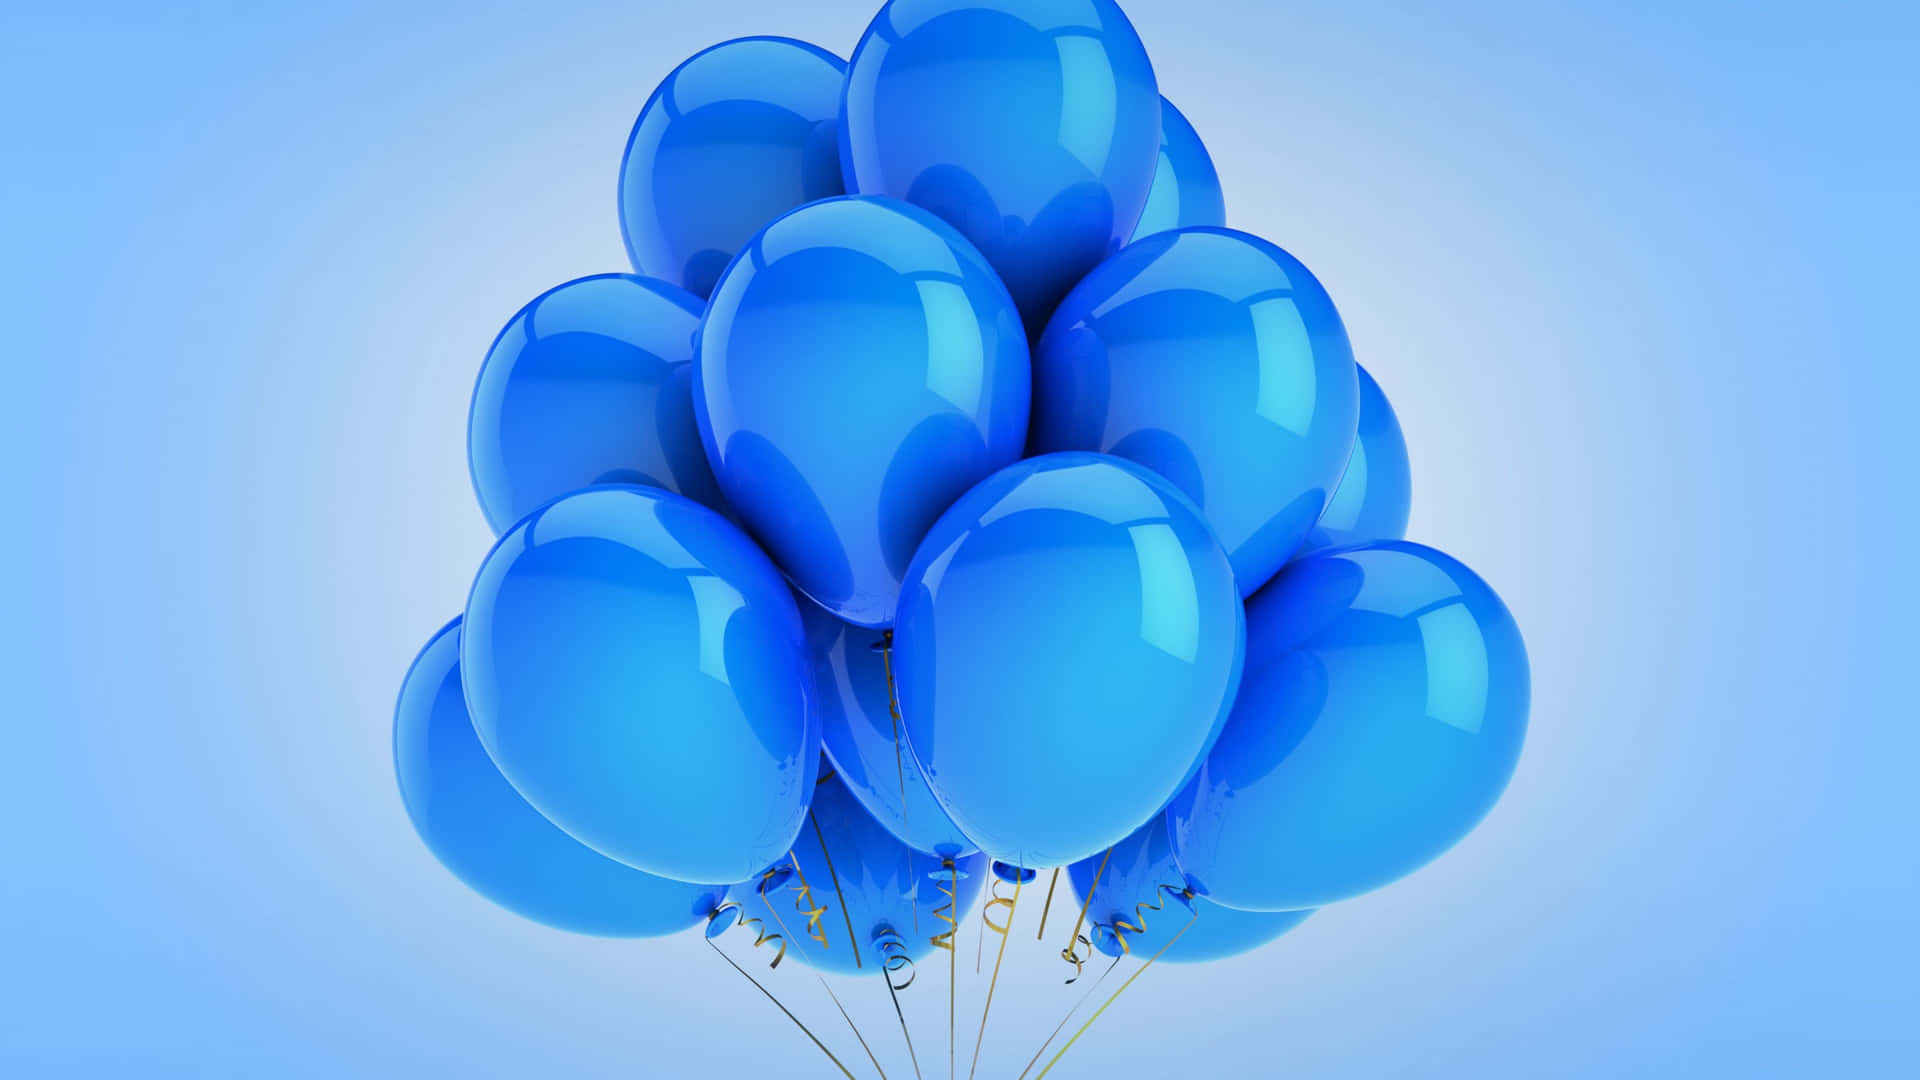 Colorful balloons fly against a crisp blue sky